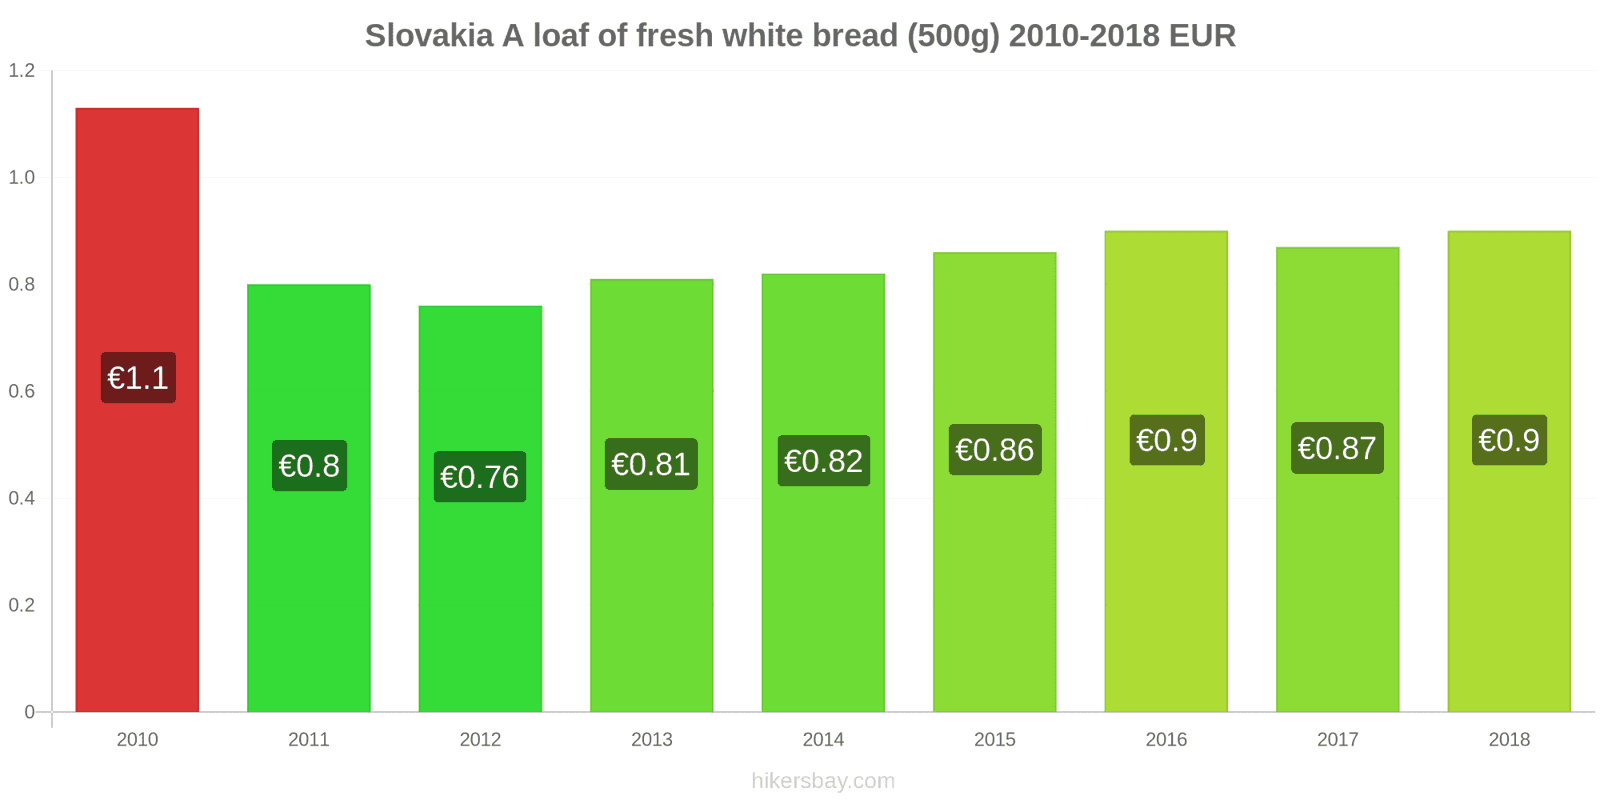 Slovakia price changes A loaf of fresh white bread (500g) hikersbay.com